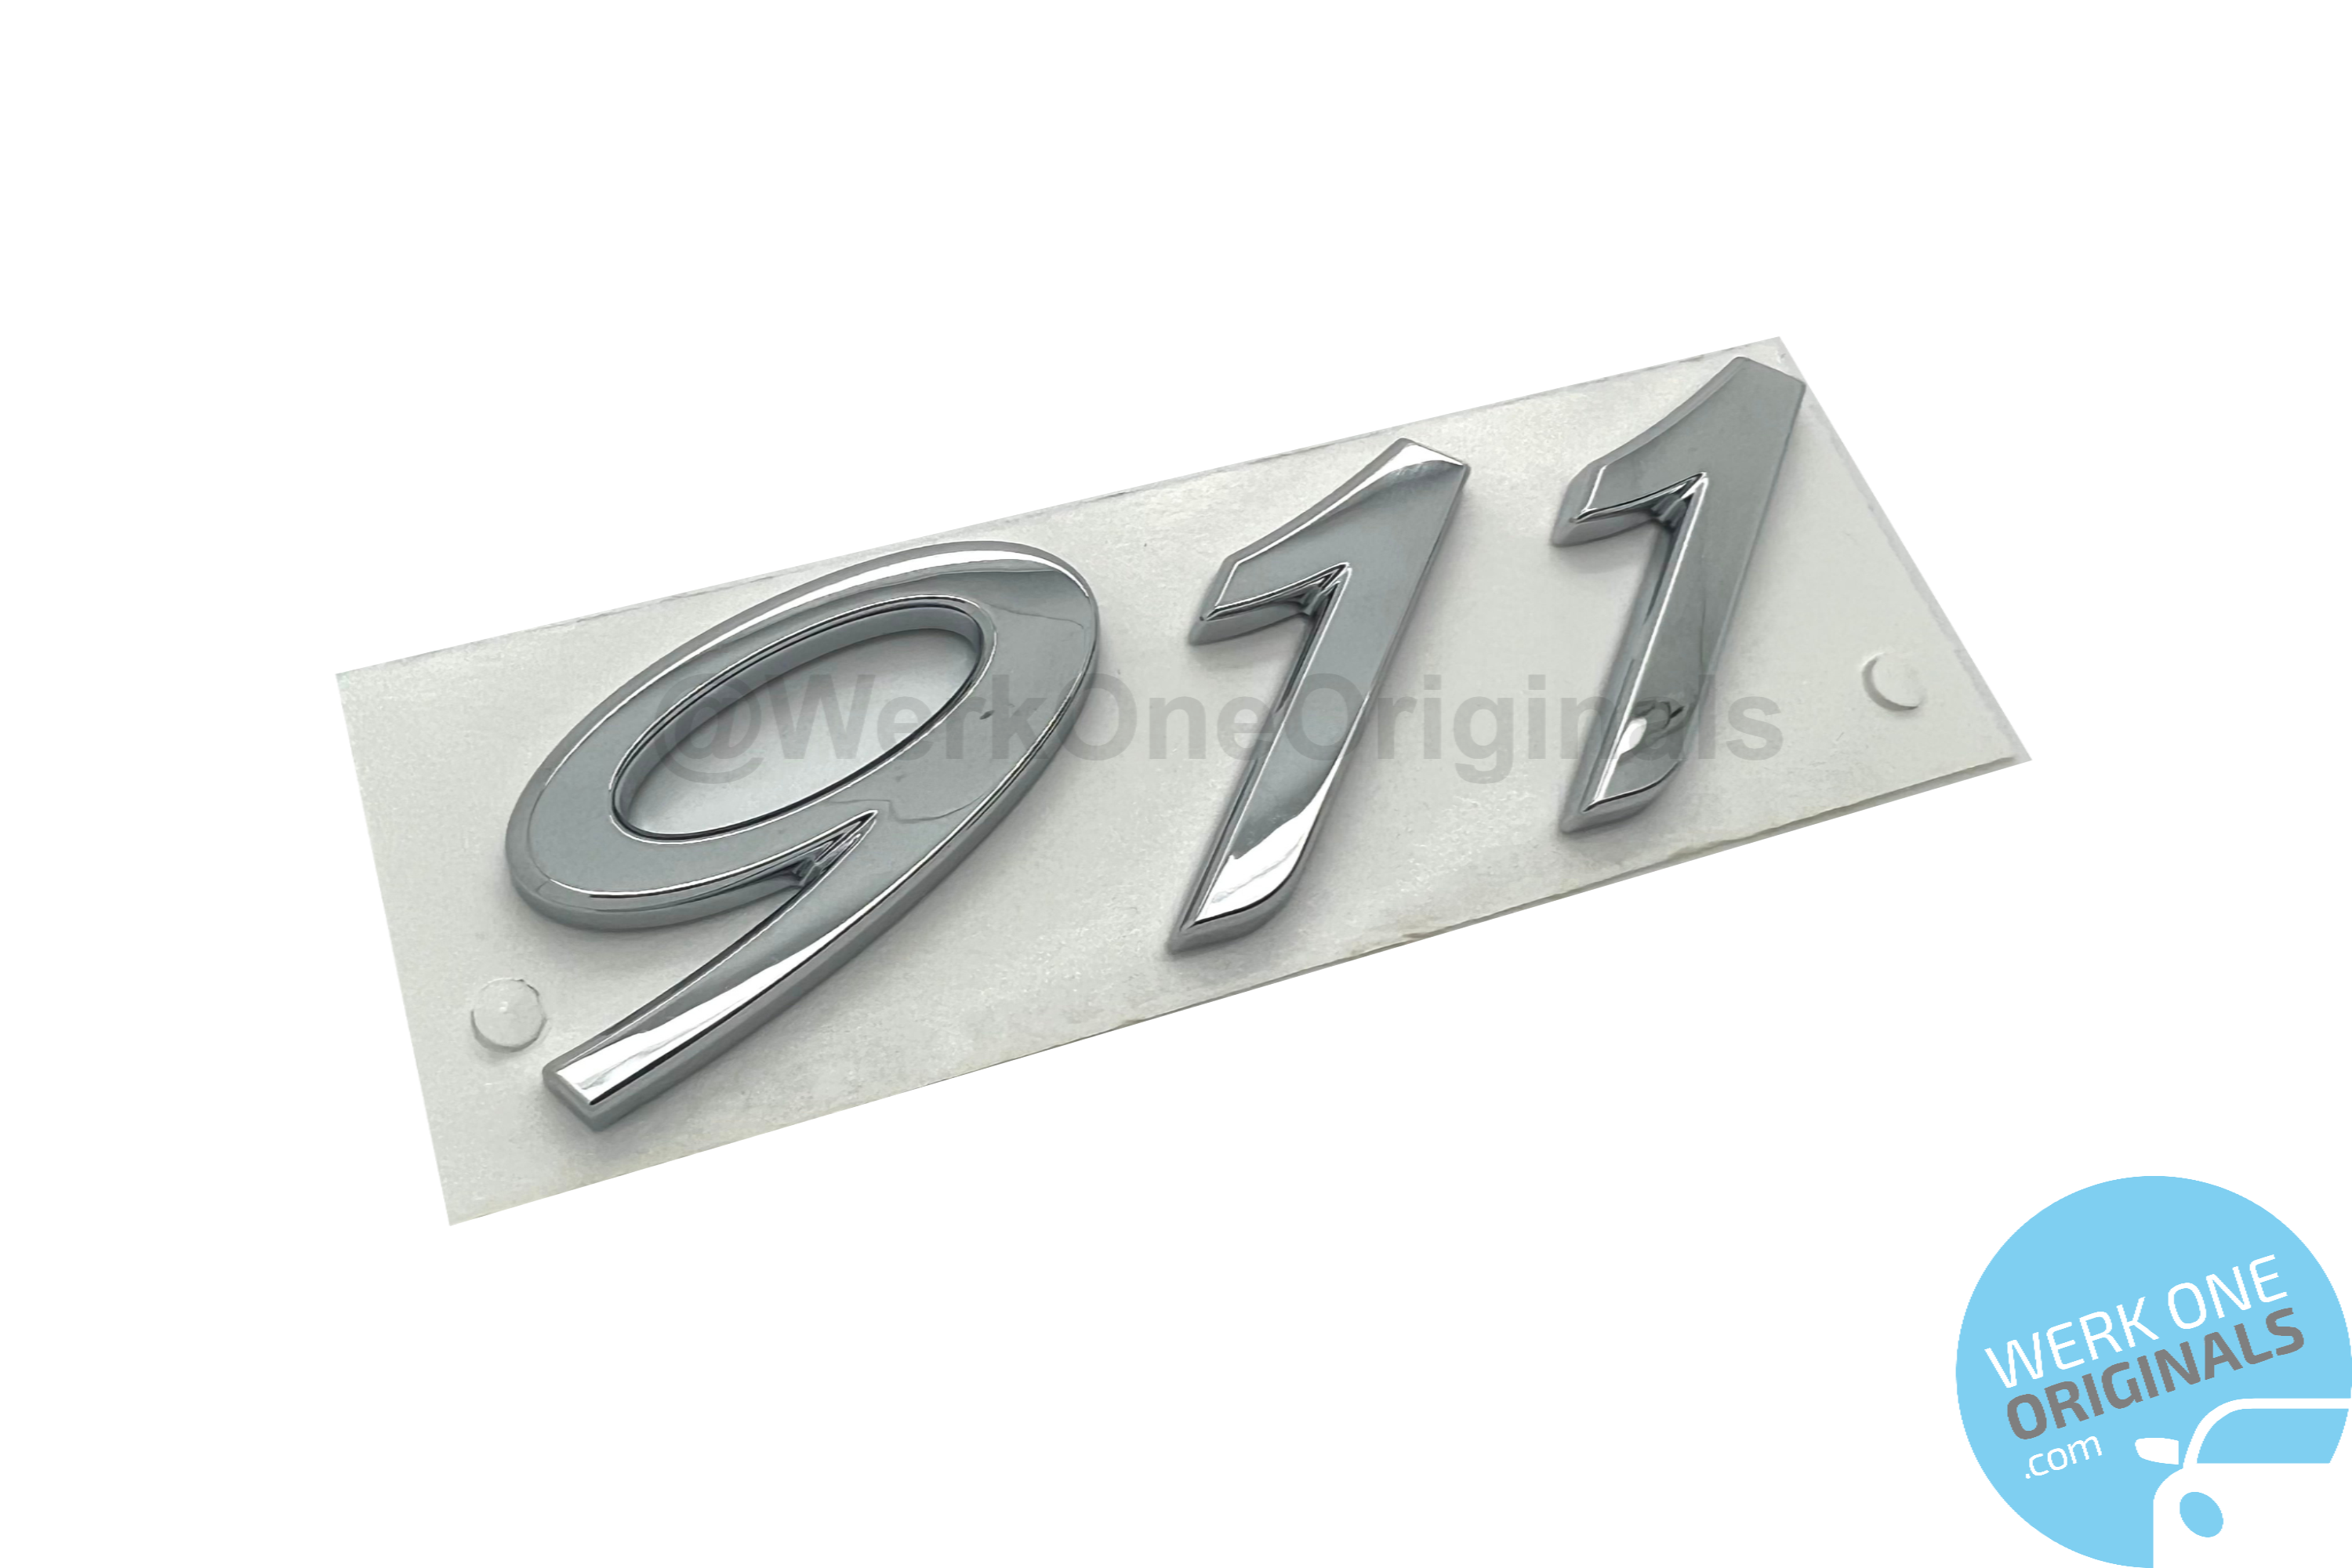 Porsche Official '911' Rear Badge Decal in Chrome Silver for 911 Type 997 Models